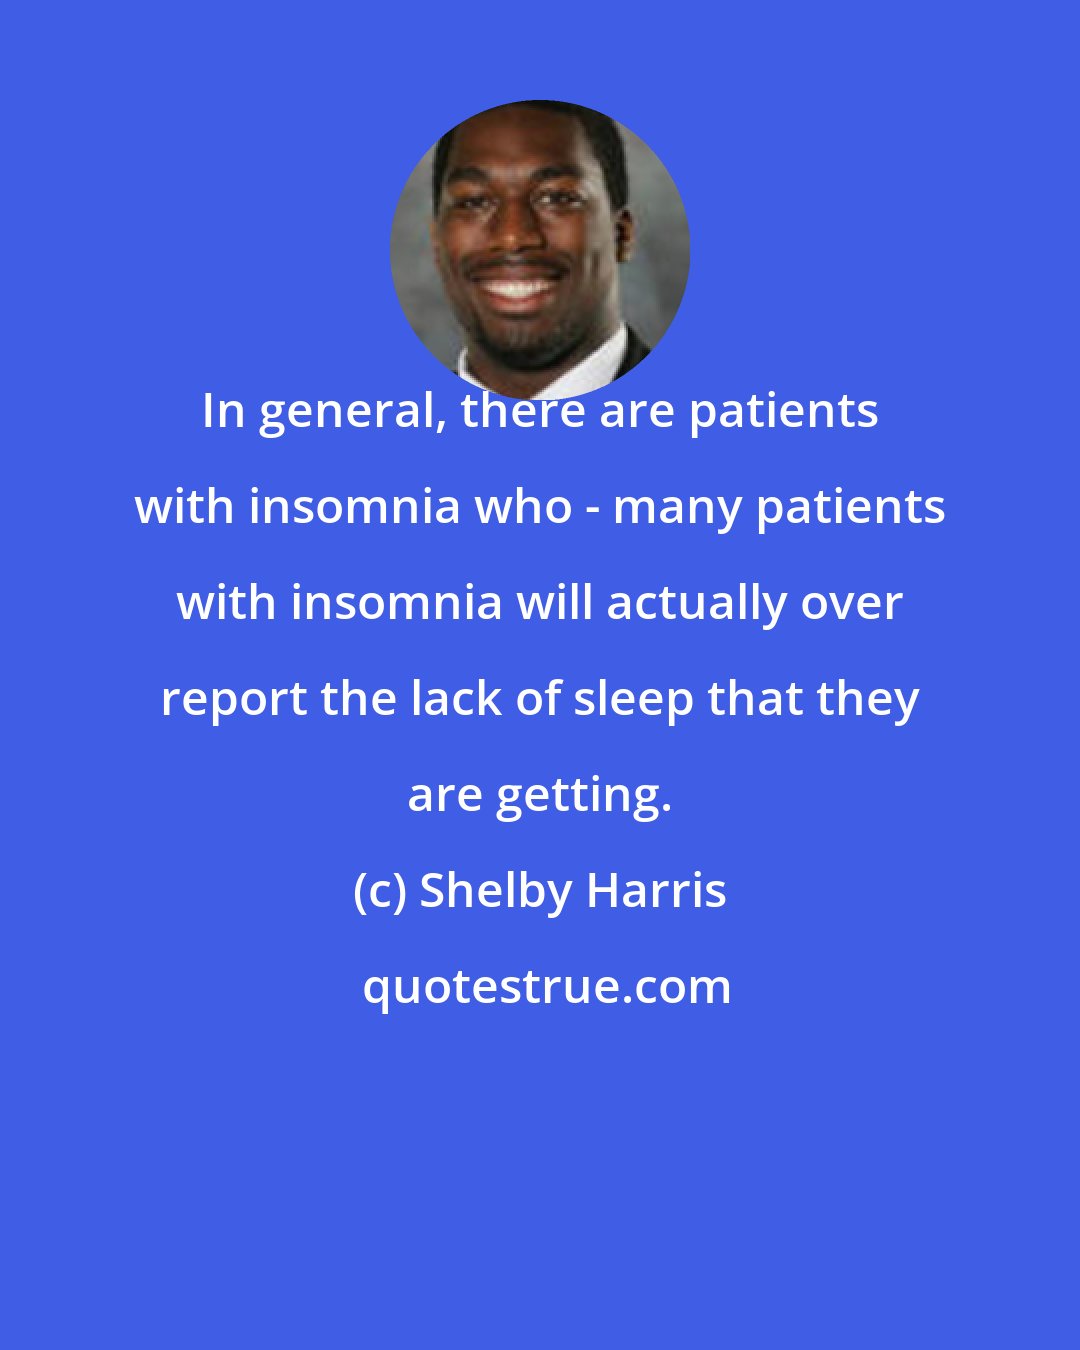 Shelby Harris: In general, there are patients with insomnia who - many patients with insomnia will actually over report the lack of sleep that they are getting.